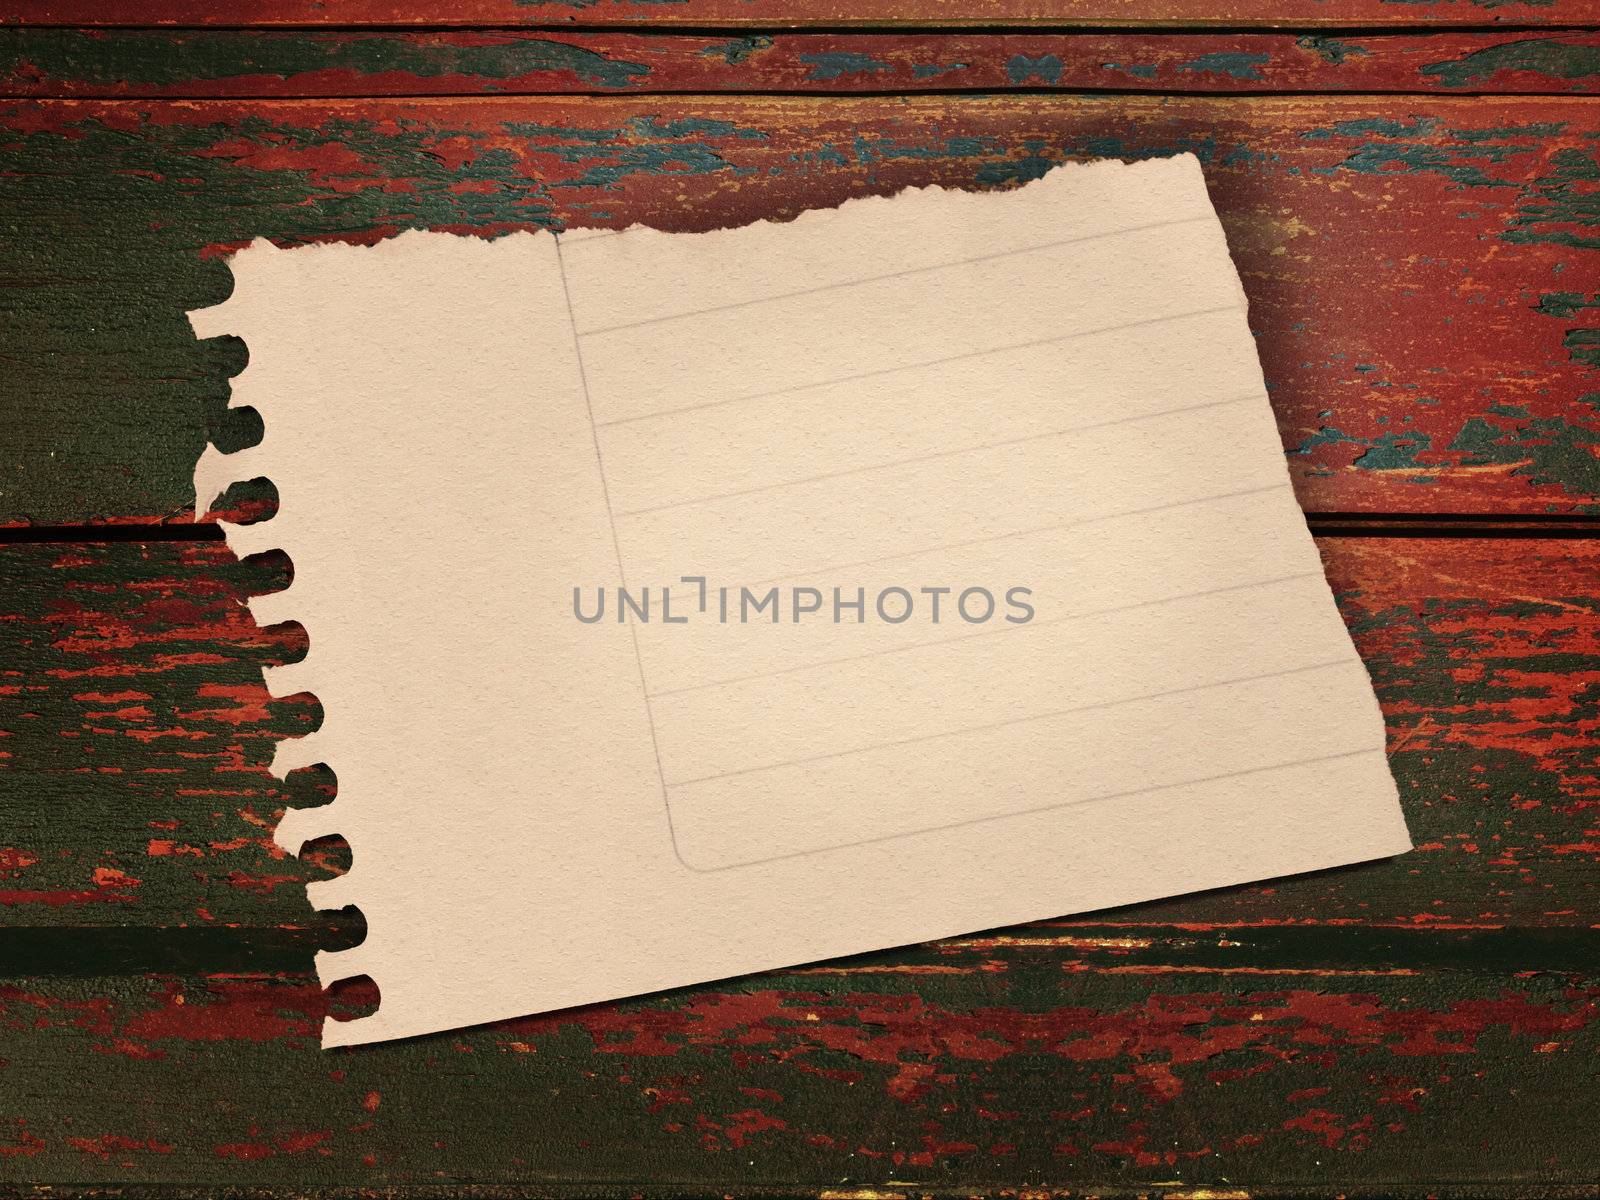 Vintage blank lined paper note over grunge wooden background. Included clipping path, so you can easily cut it out and place over the top of a design.